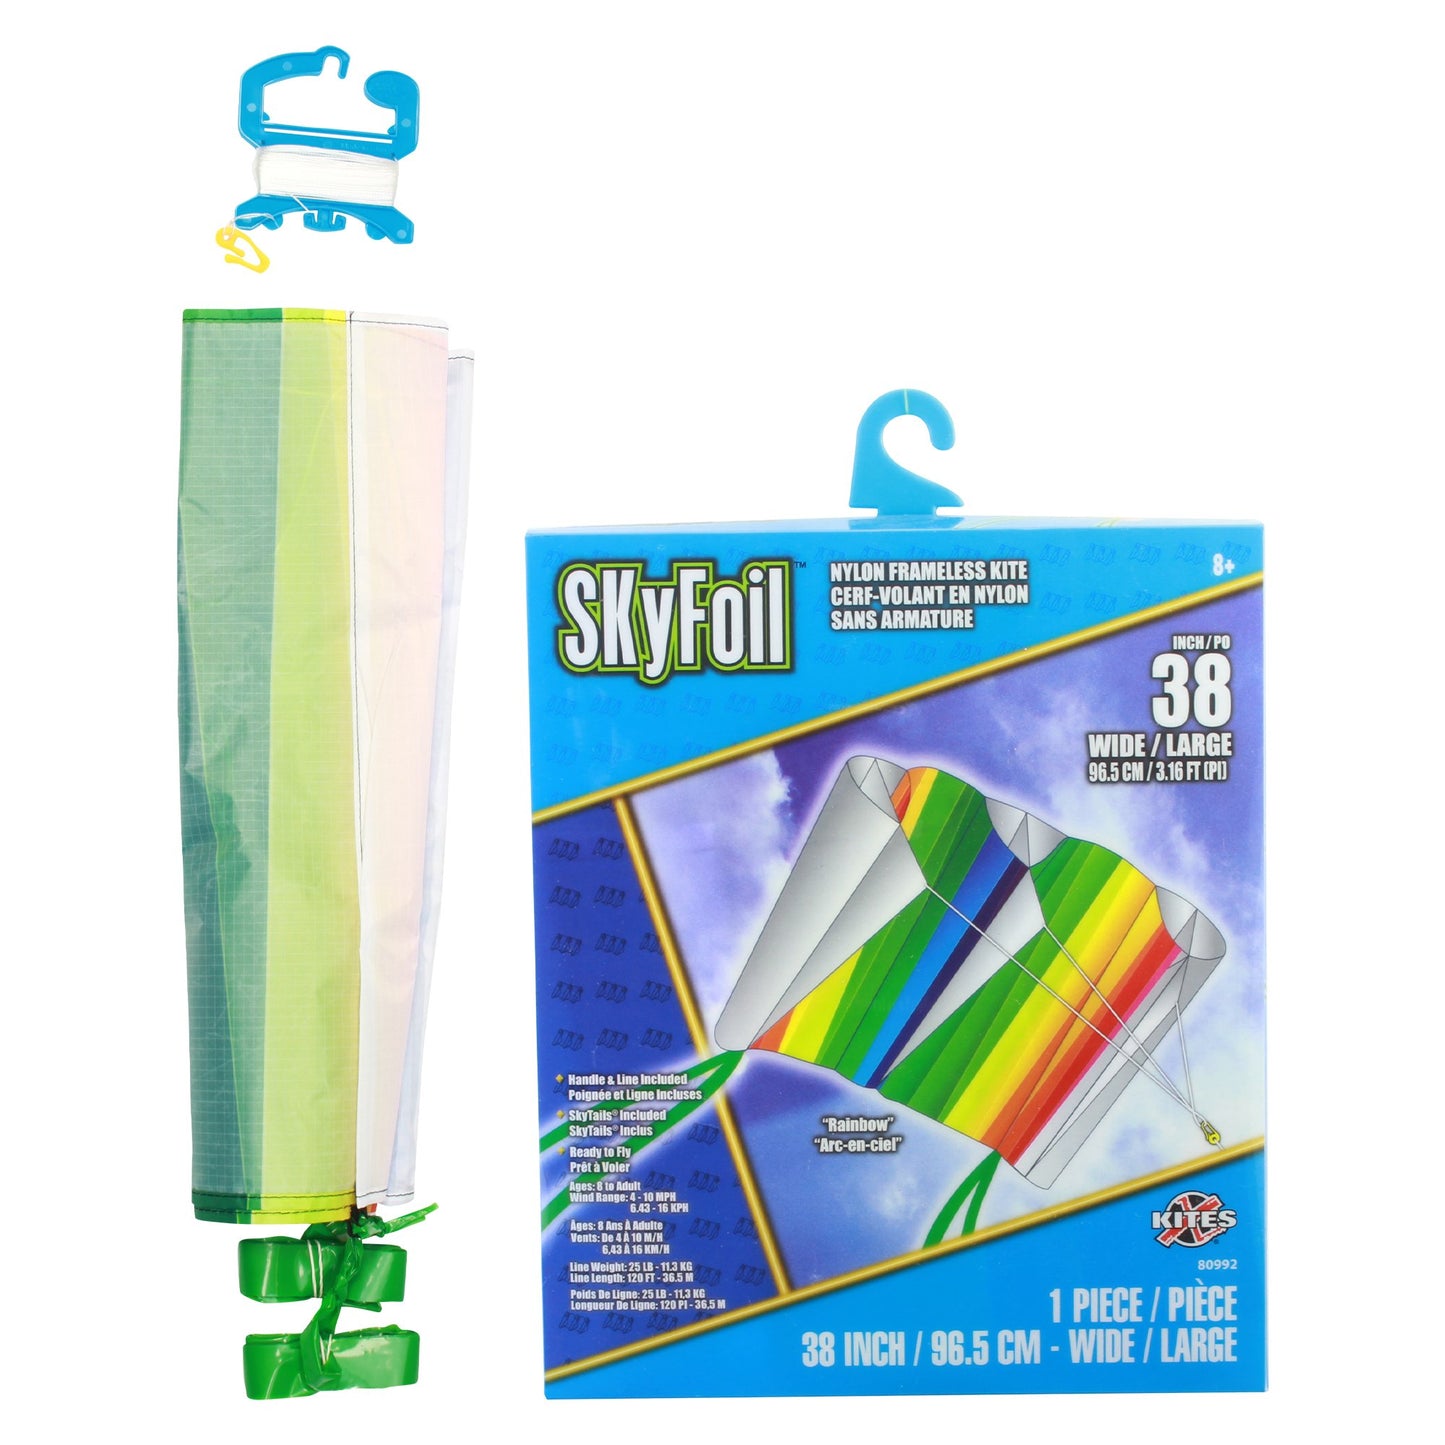 X Kites SkyFoil Rainbow + Pocket Kite Abstract Parafoil Kite Bundle - No Assembly Required packaging and contents